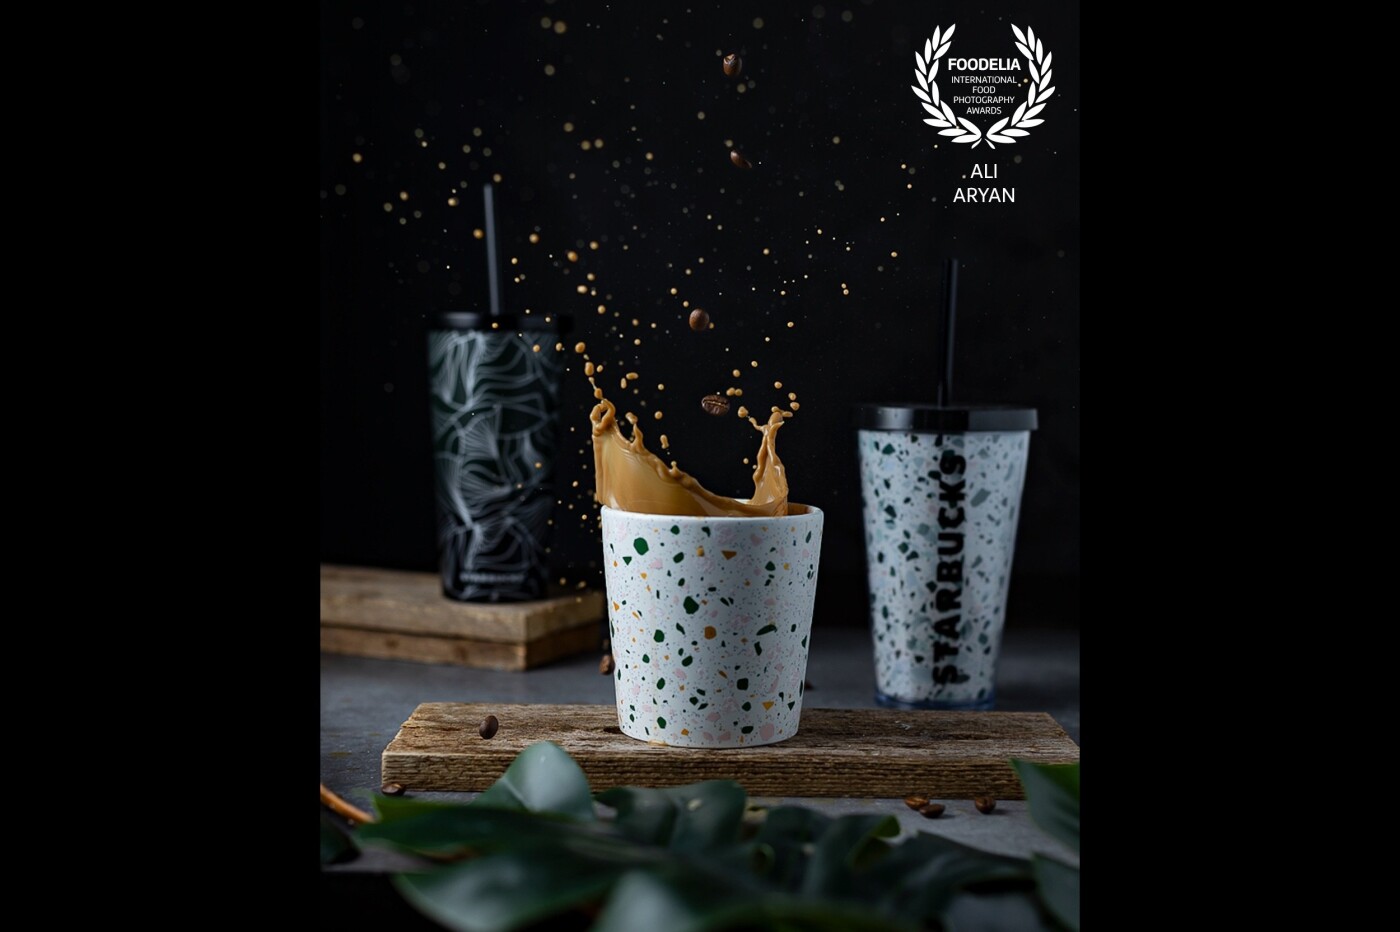 Hi everyone, this is the new collection of mugs from Starbucks cafe, and I have completed it with a splash shot, i also added coffee beans to make it look realistic. Hope you like it and goodbye.<br />
